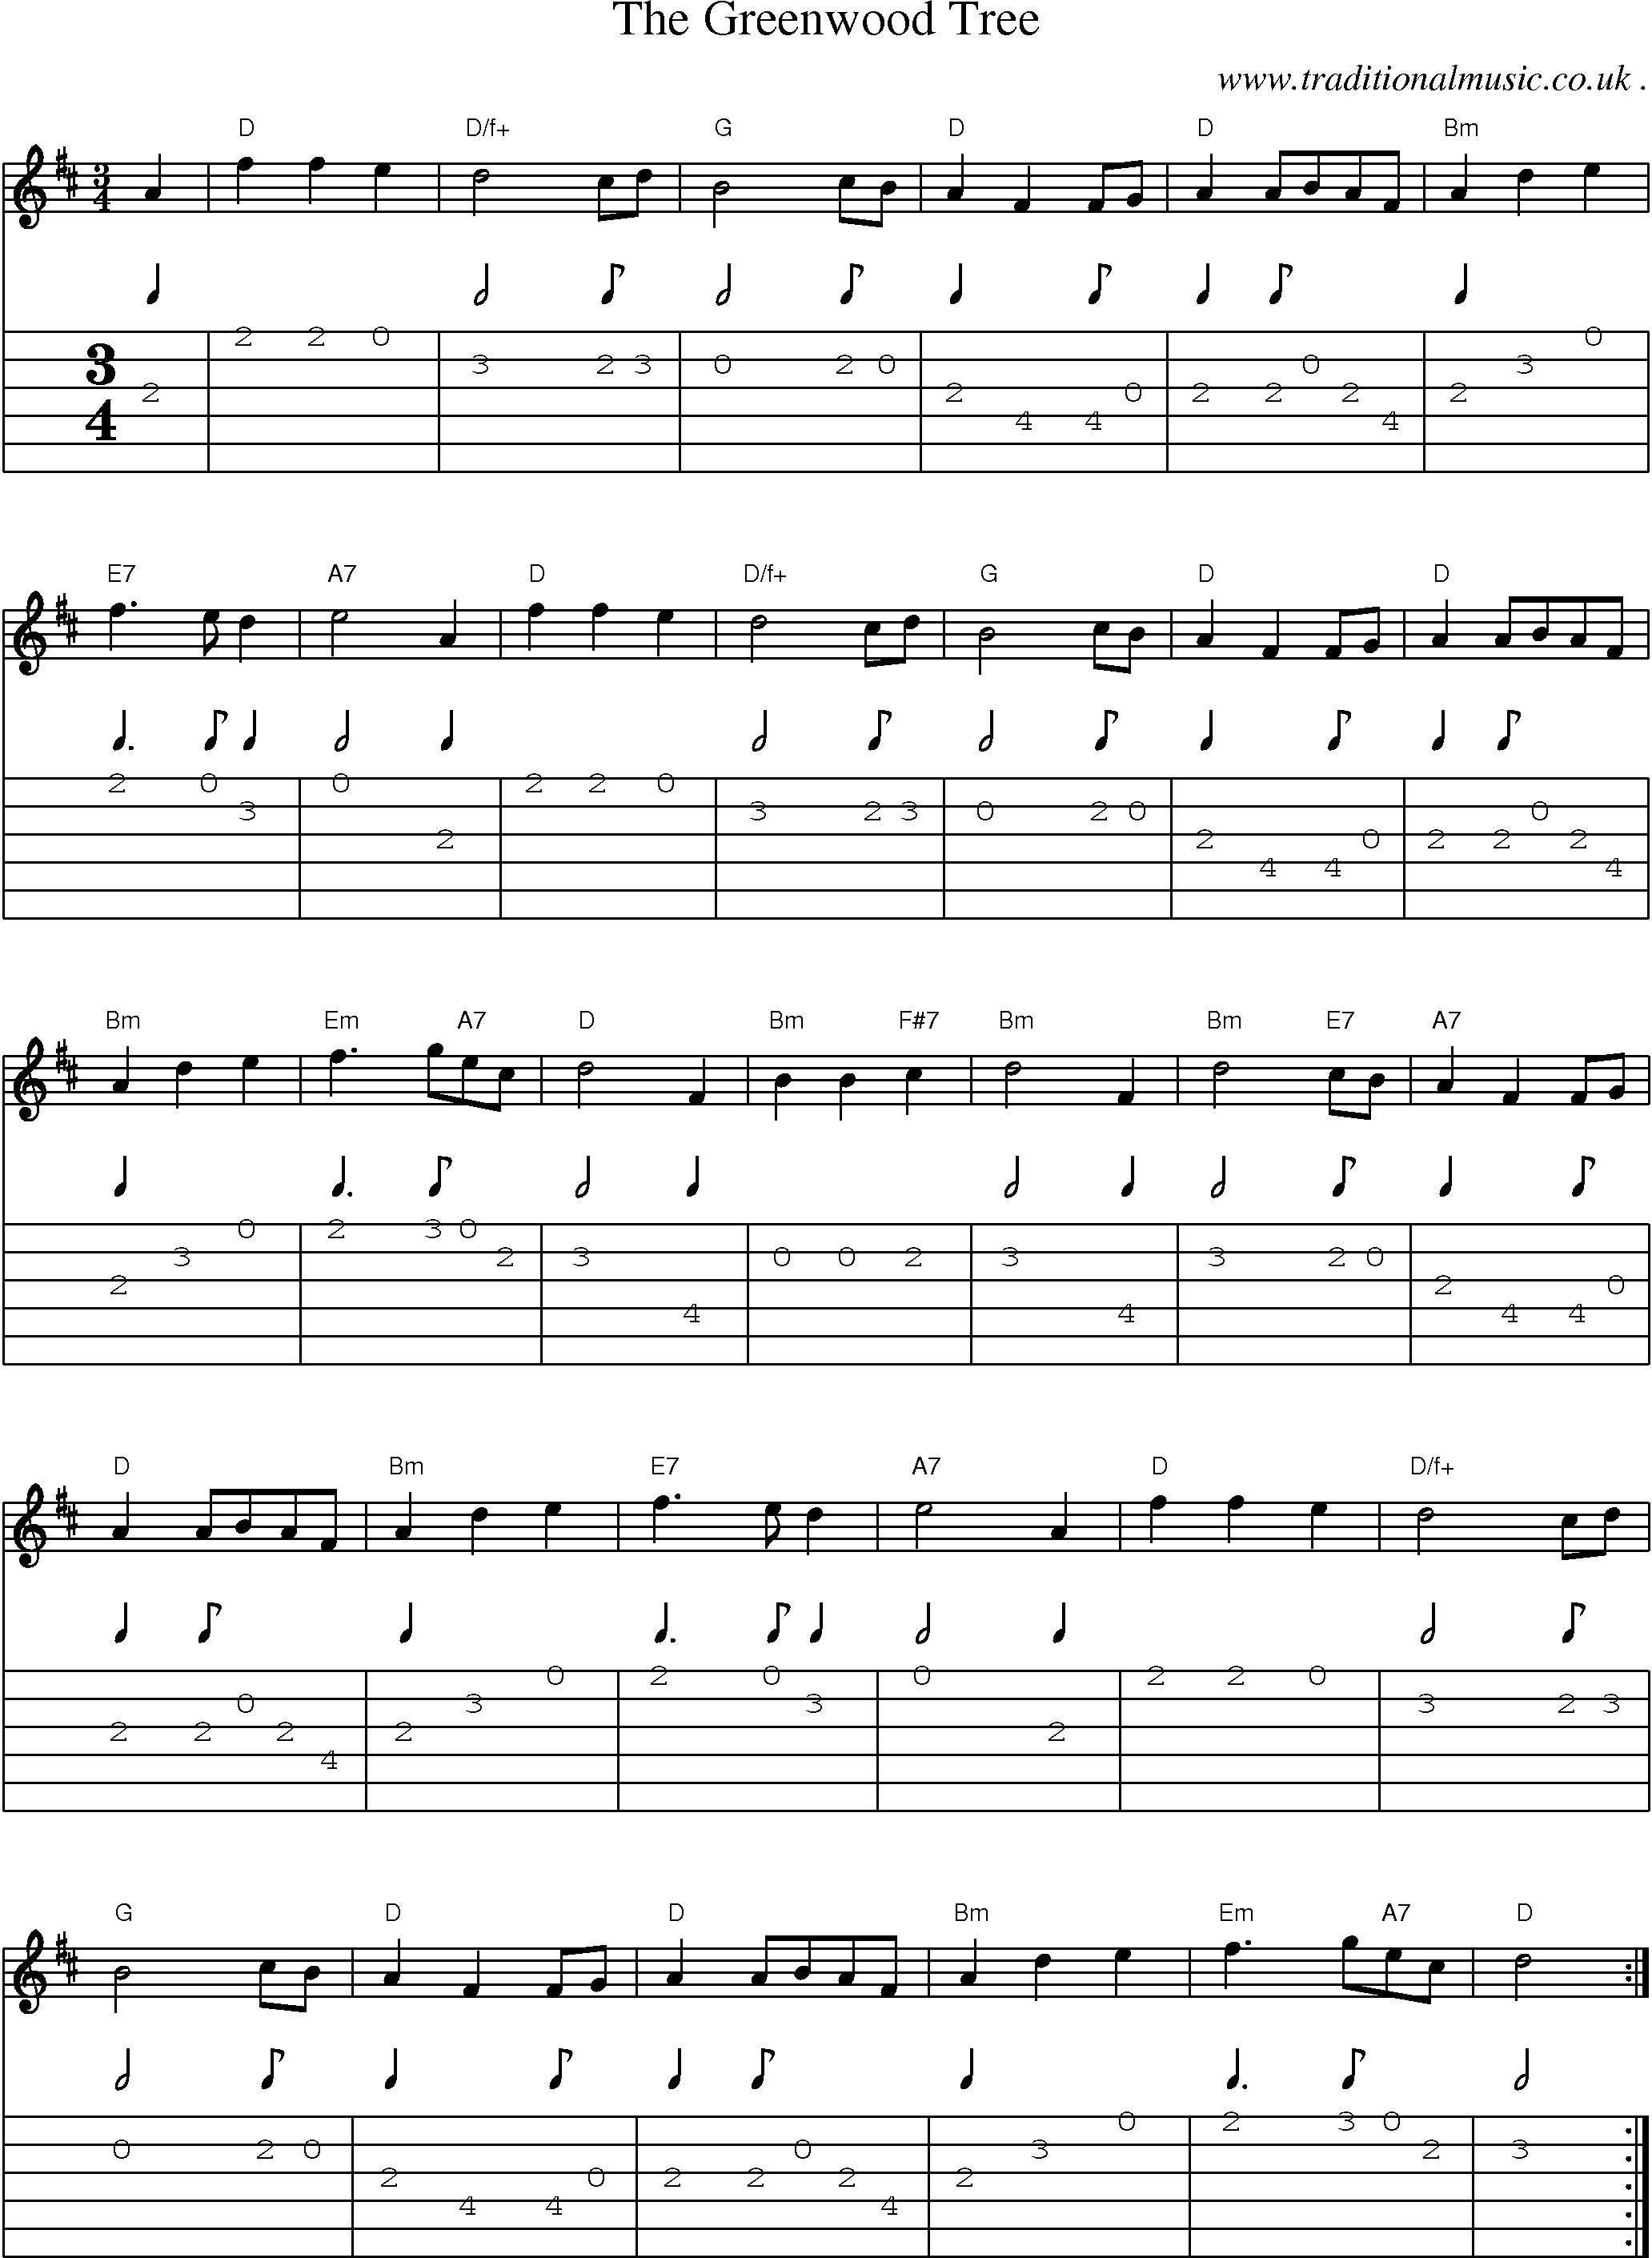 Sheet-Music and Guitar Tabs for The Greenwood Tree